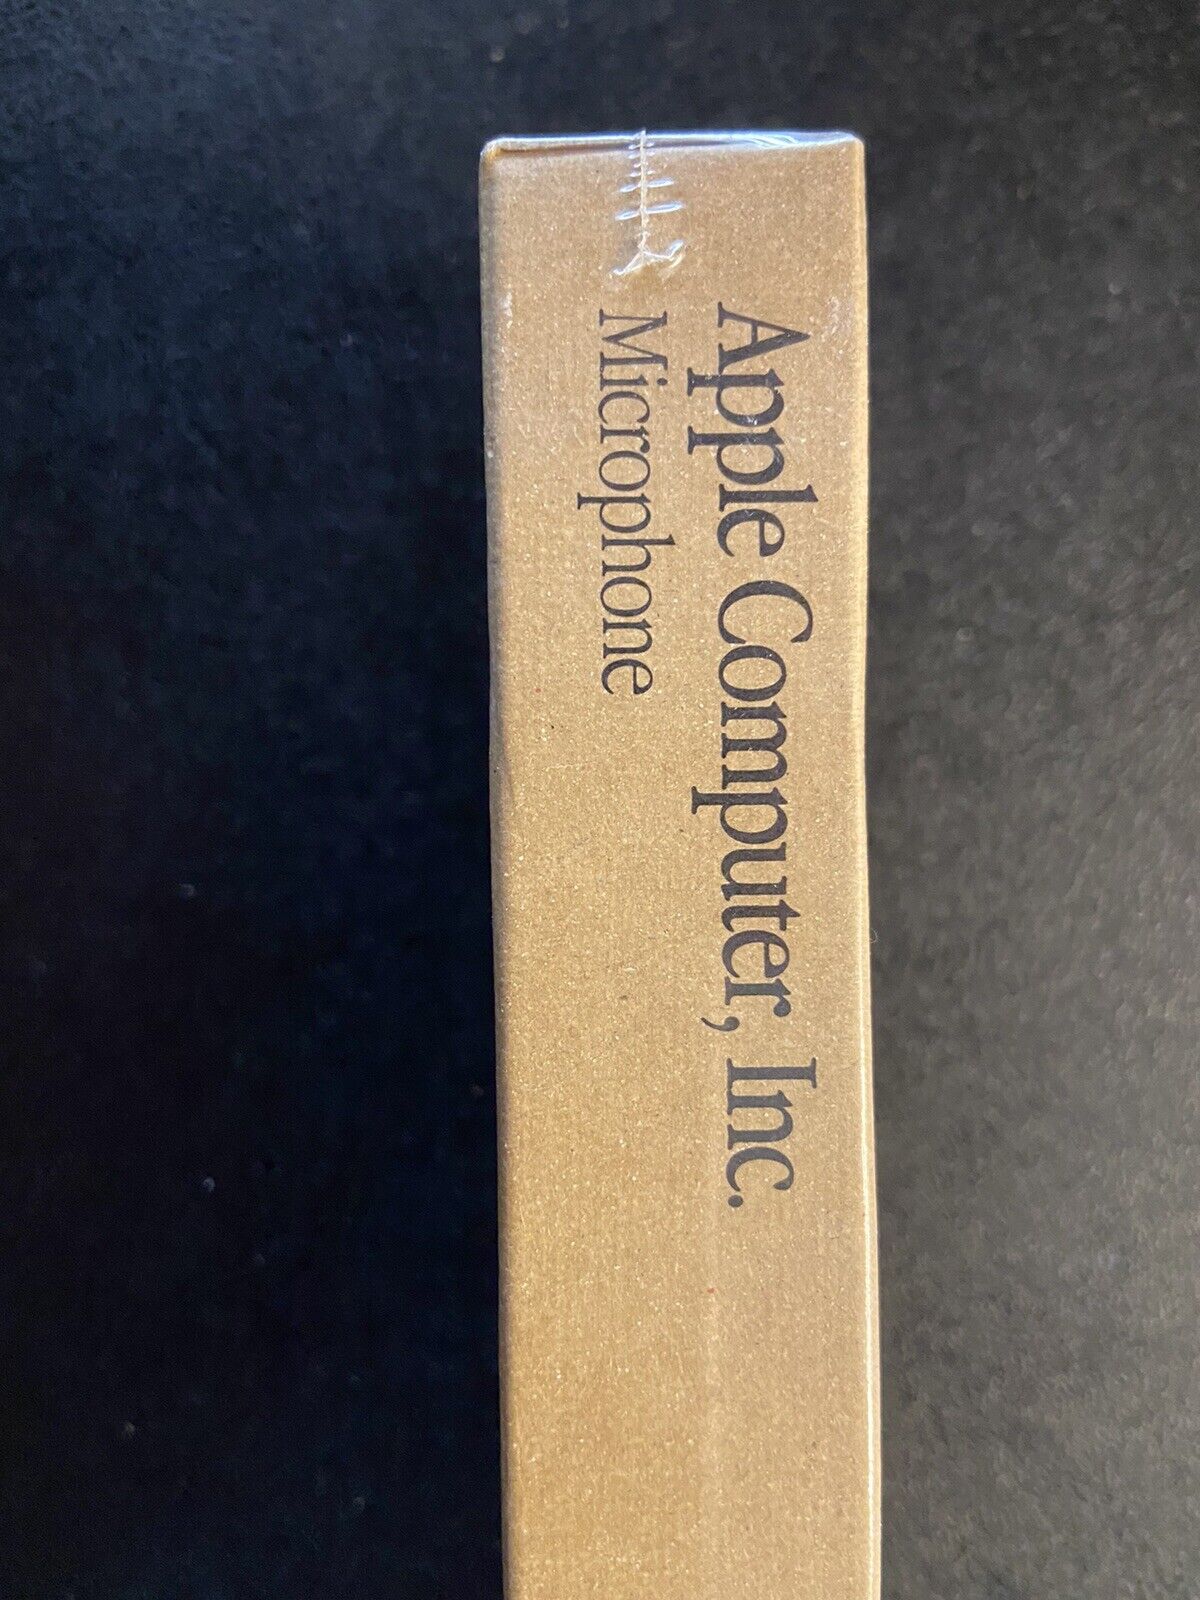 Vintage NOS 1991 Apple Computer Inc Microphone 699-5103-A Computer Accessory -N1